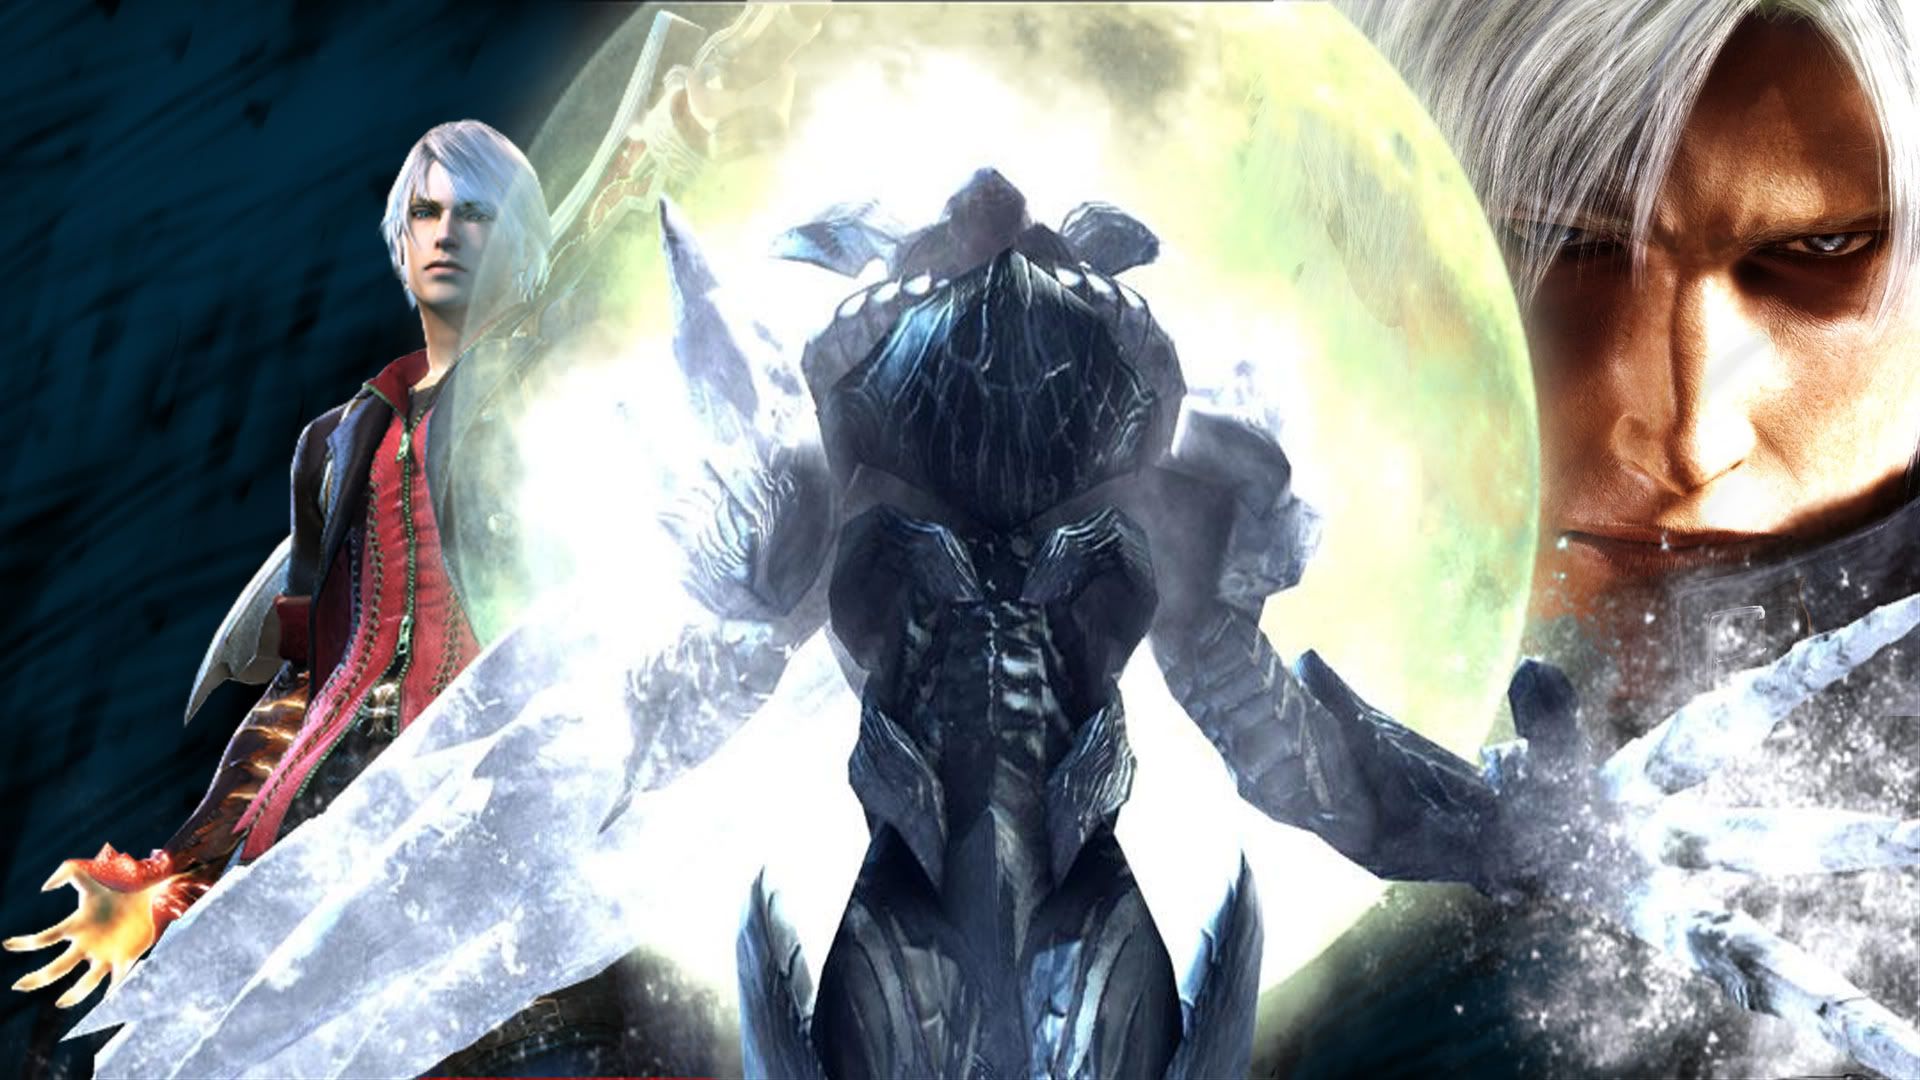 Devil+may+cry+4+wallpaper+1920x1080